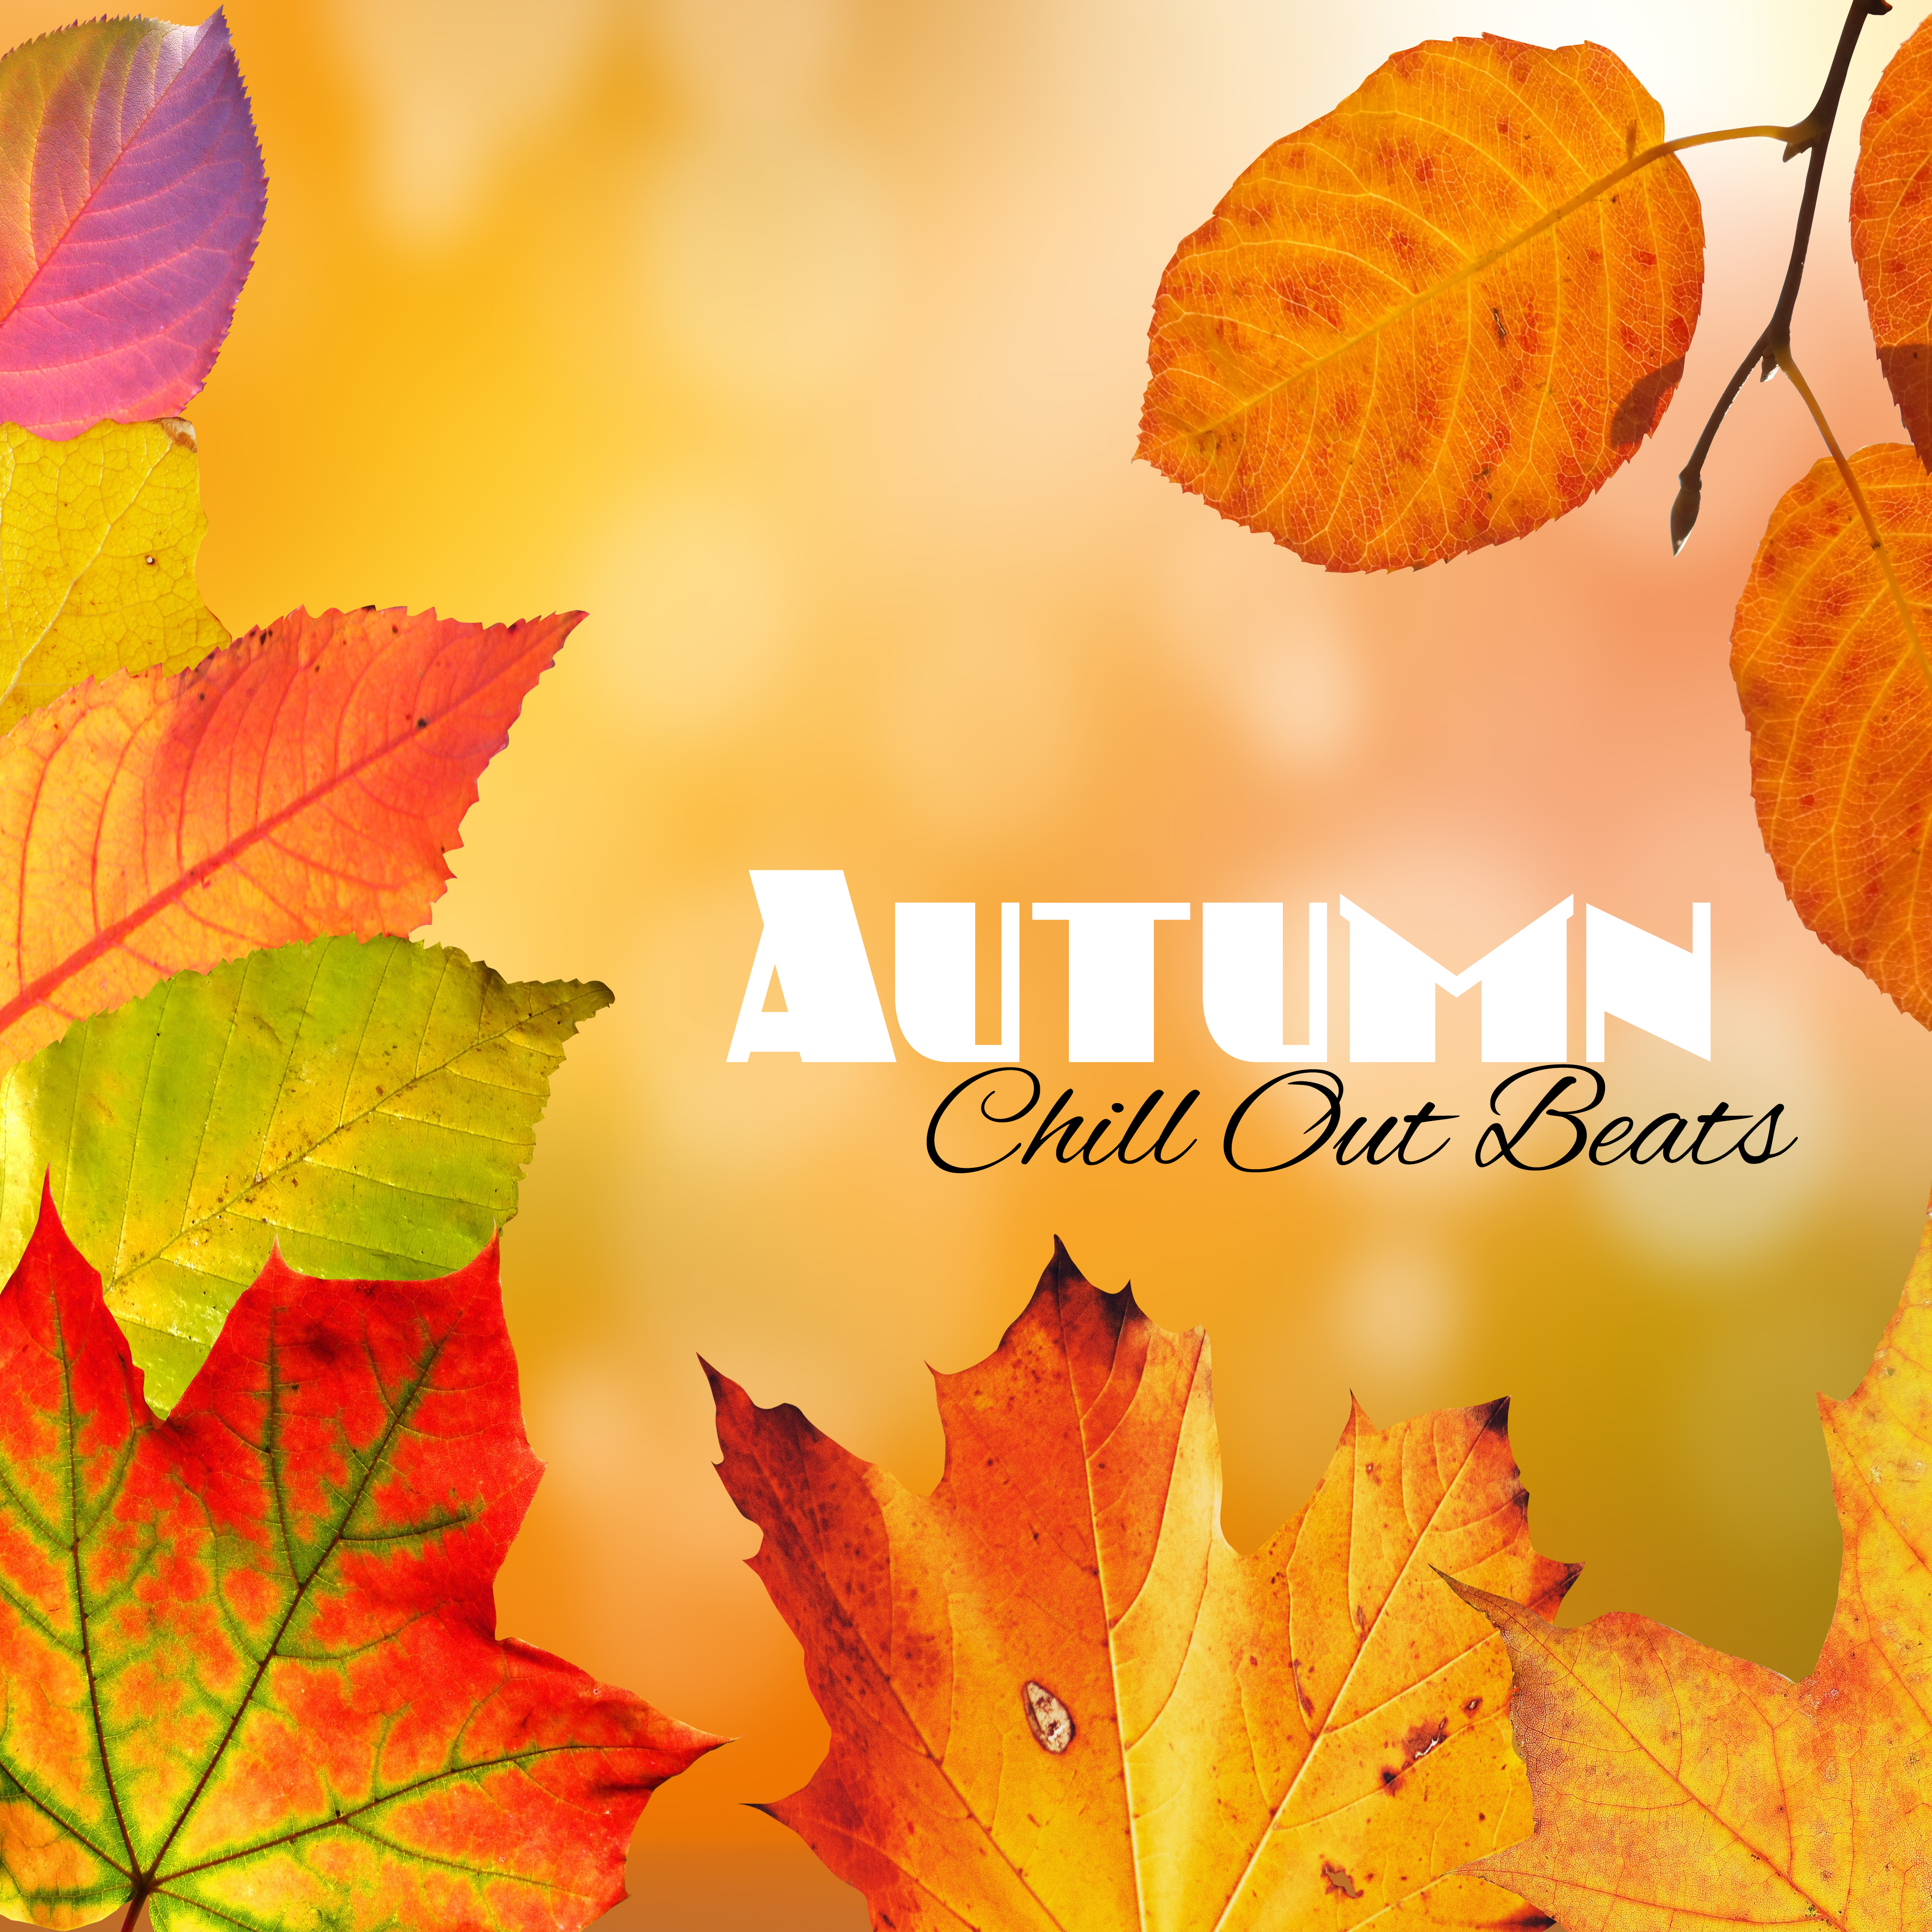 Autumn Chill Out Beats  Calm Melodies to Relax, Chill Out Beats, Soft Vibes, Evening Relaxation